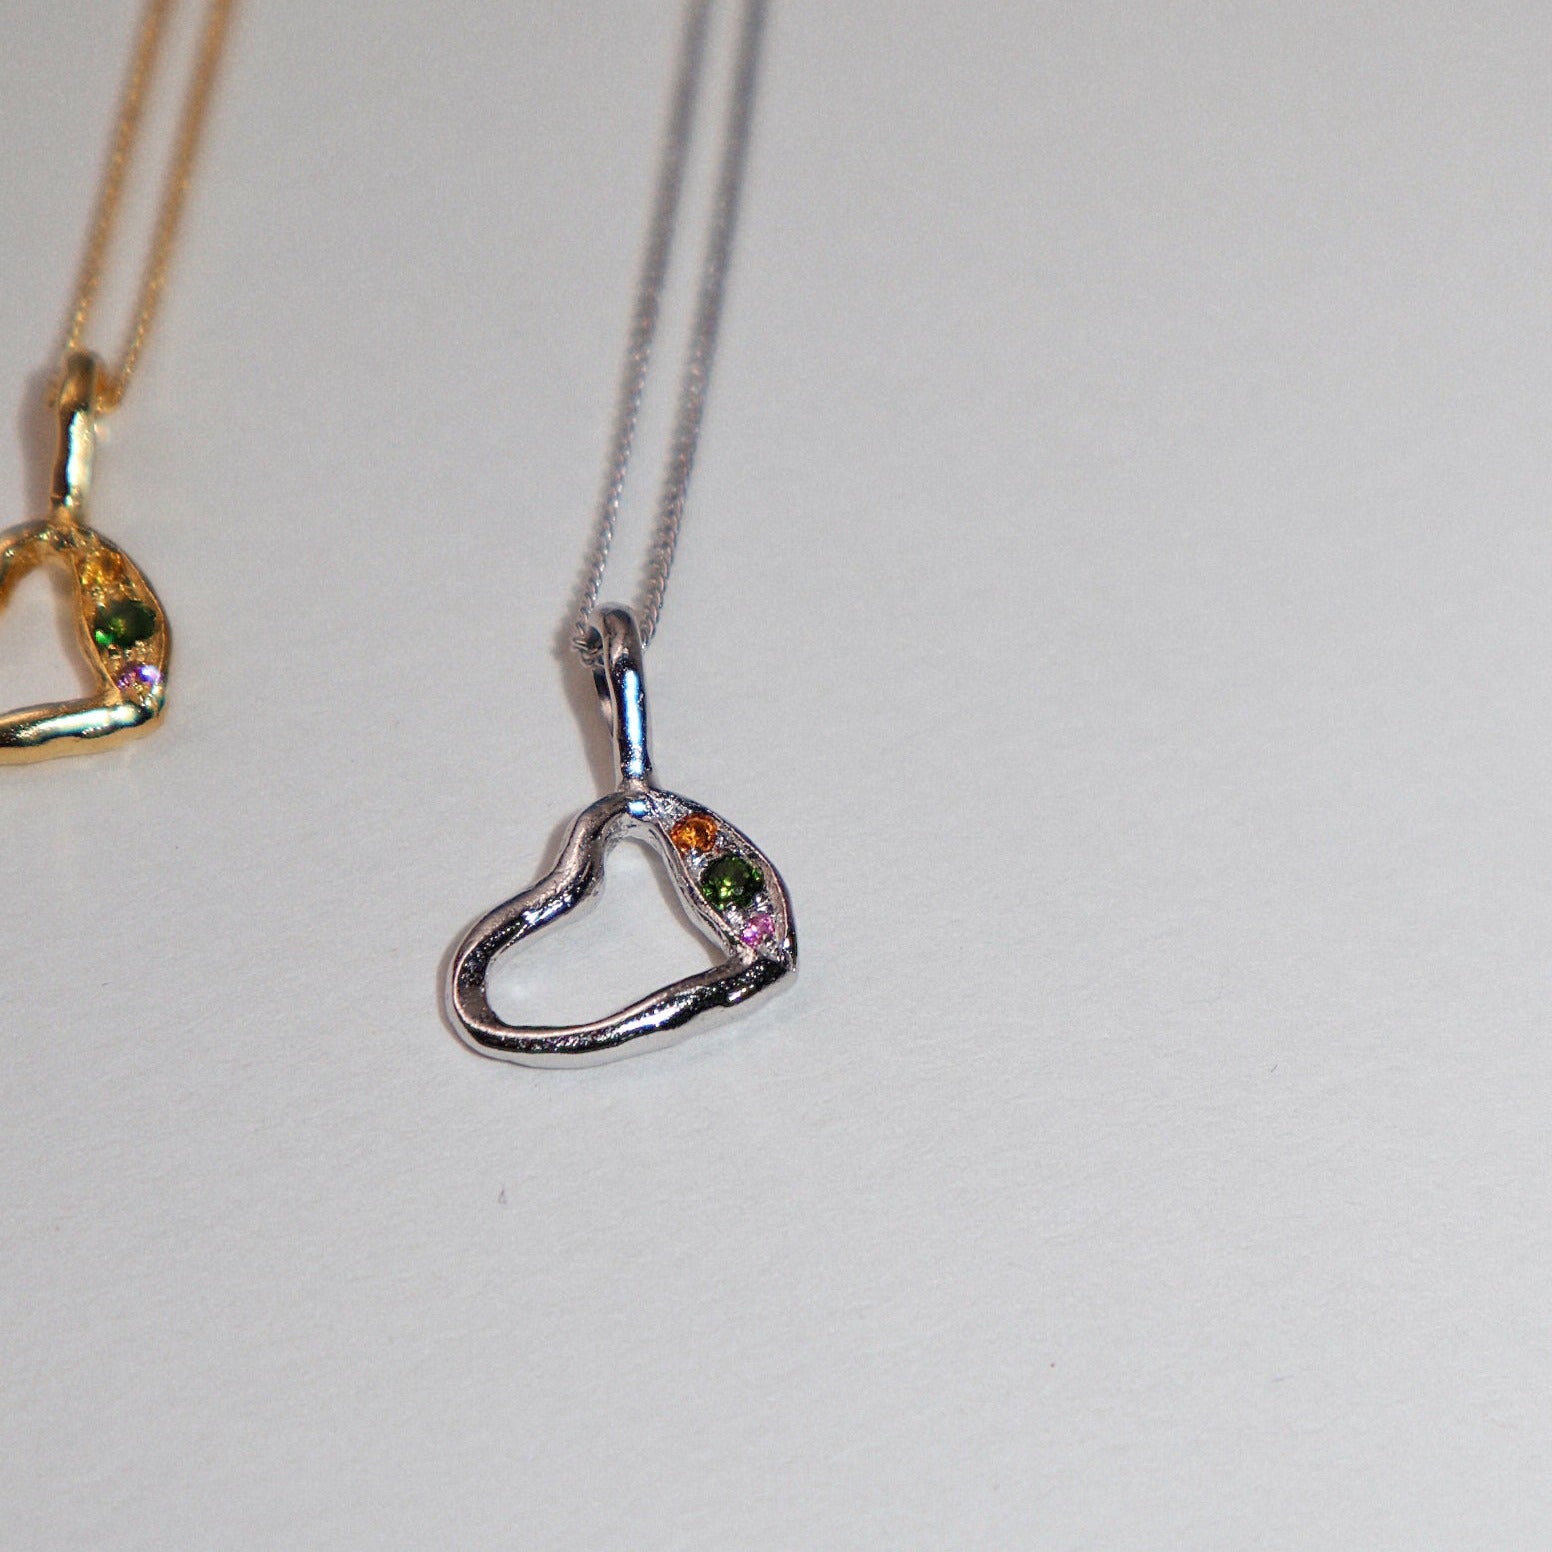 'Mixed Emotion' Heart Necklace